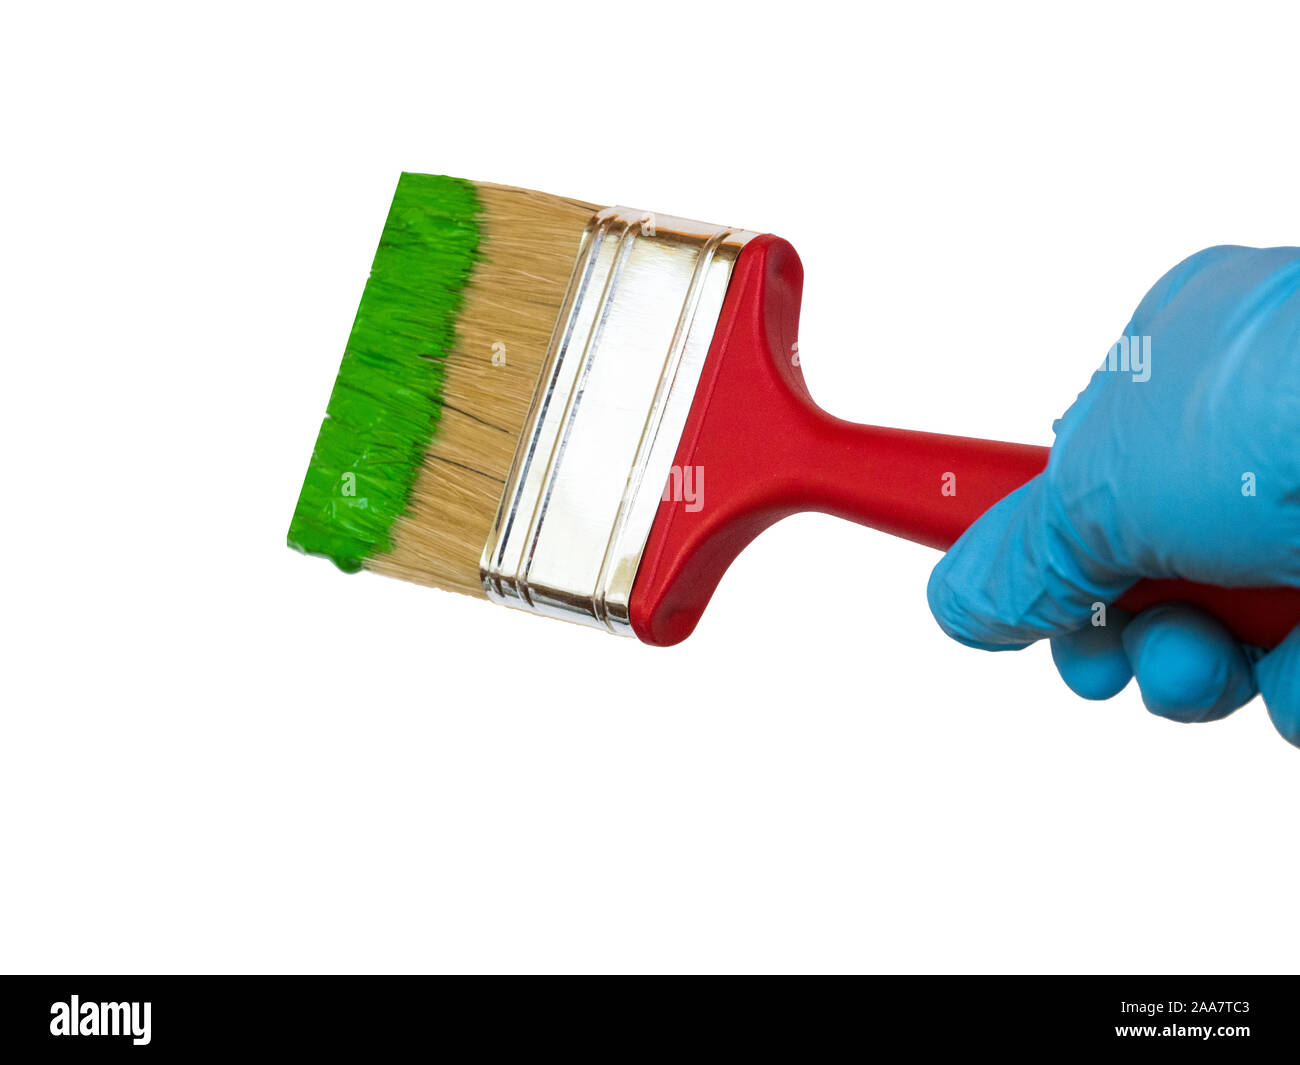 Browse Free HD Images of Hand Dips Paint Brush Into Paint Pallet